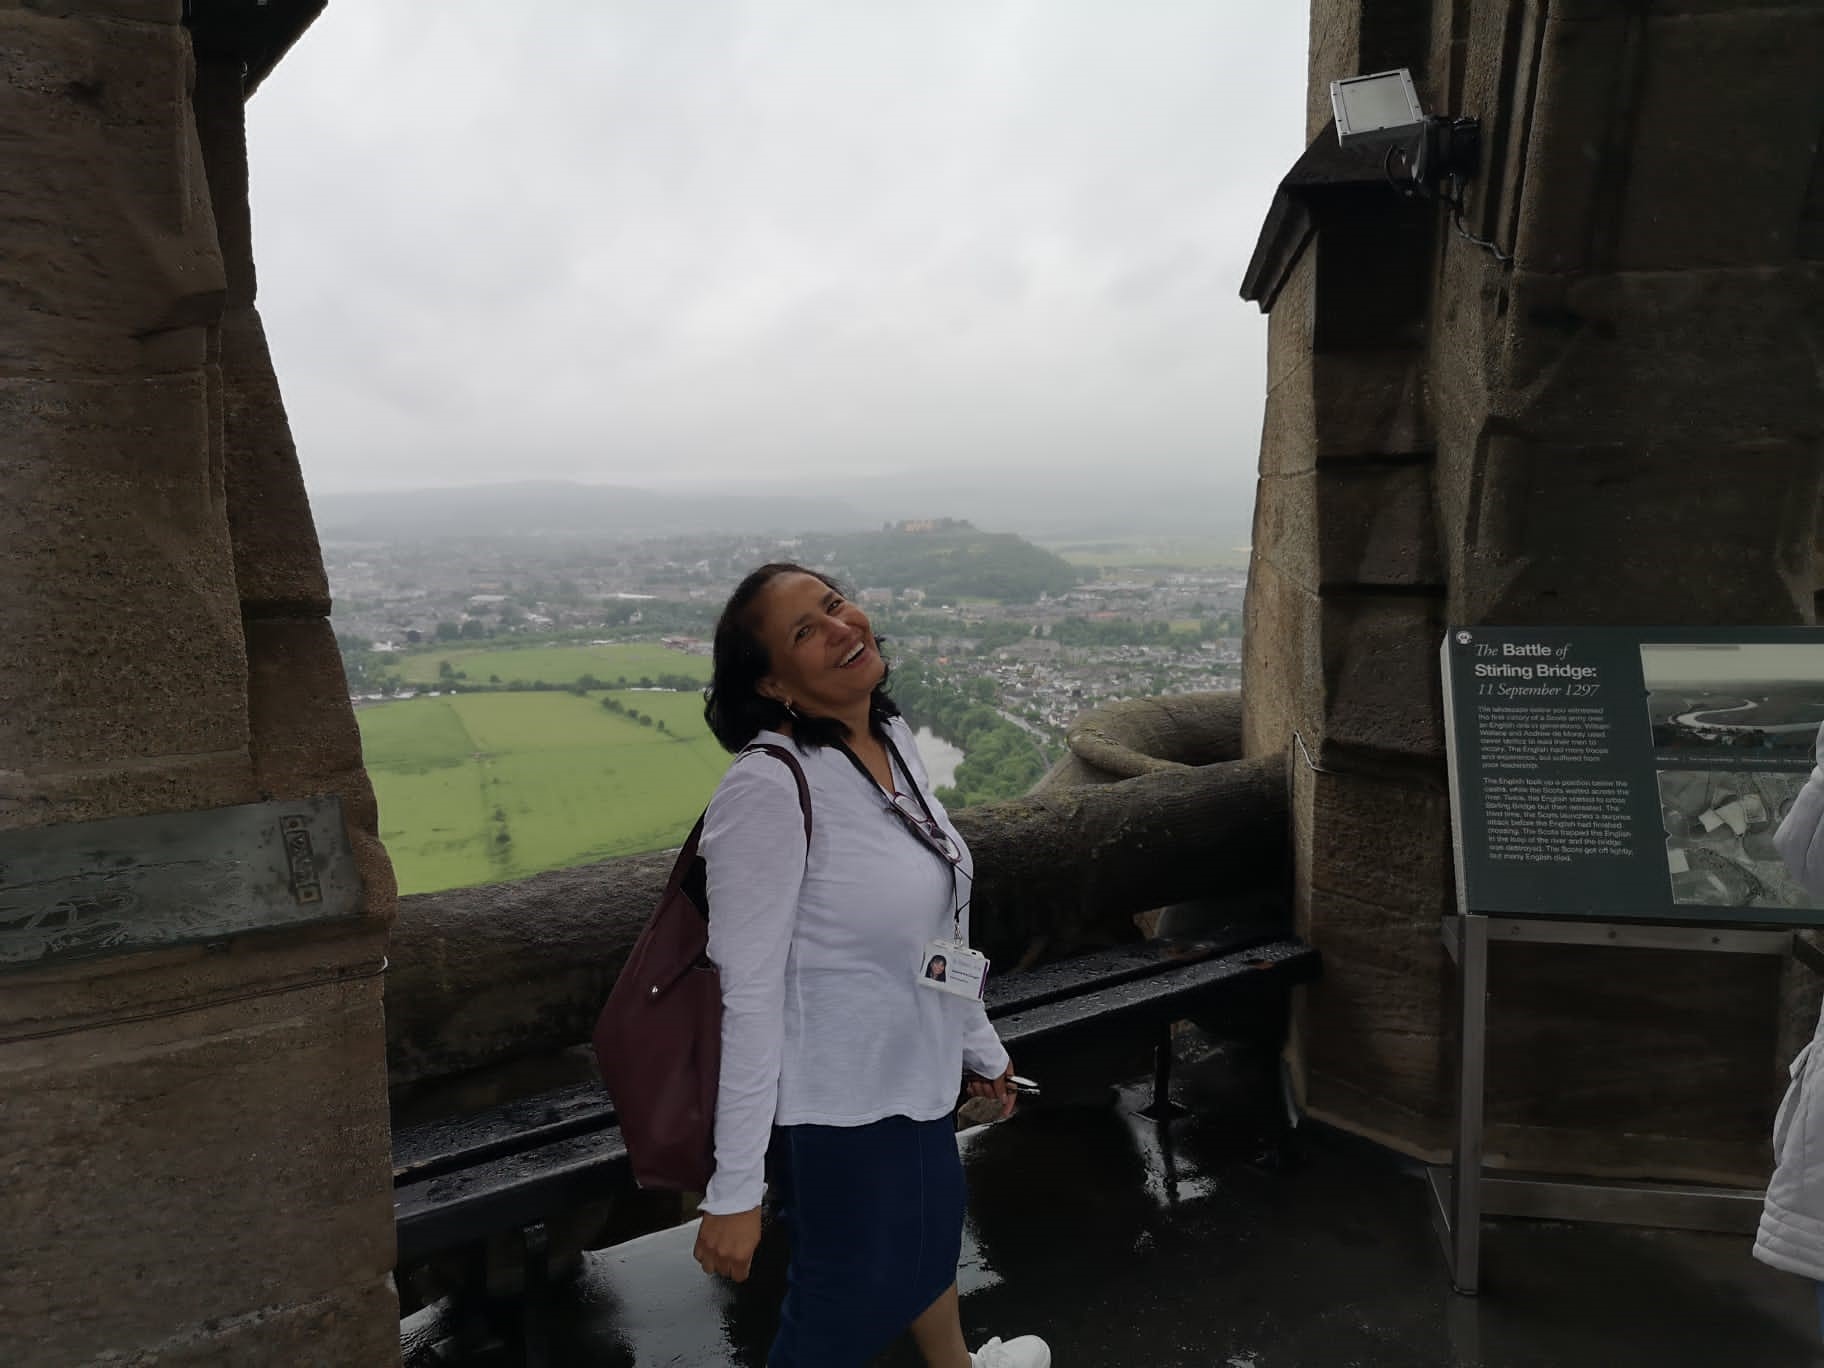 A member of the iCentre team standing at a viewing point at the top of the Wallace Monument with views of hills in the background